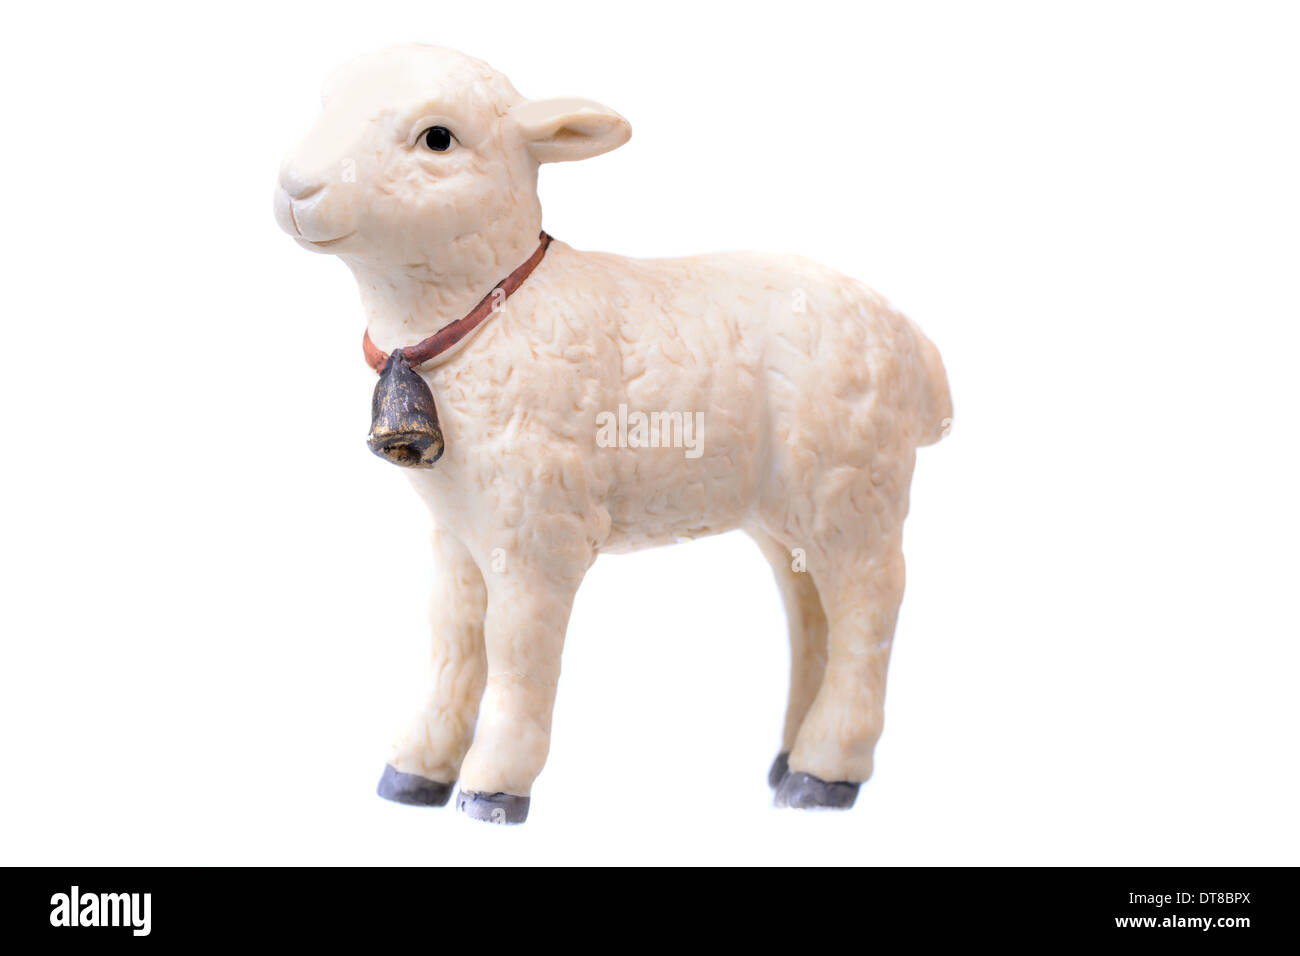 Small little lamb figurine isolated on White Stock Photo